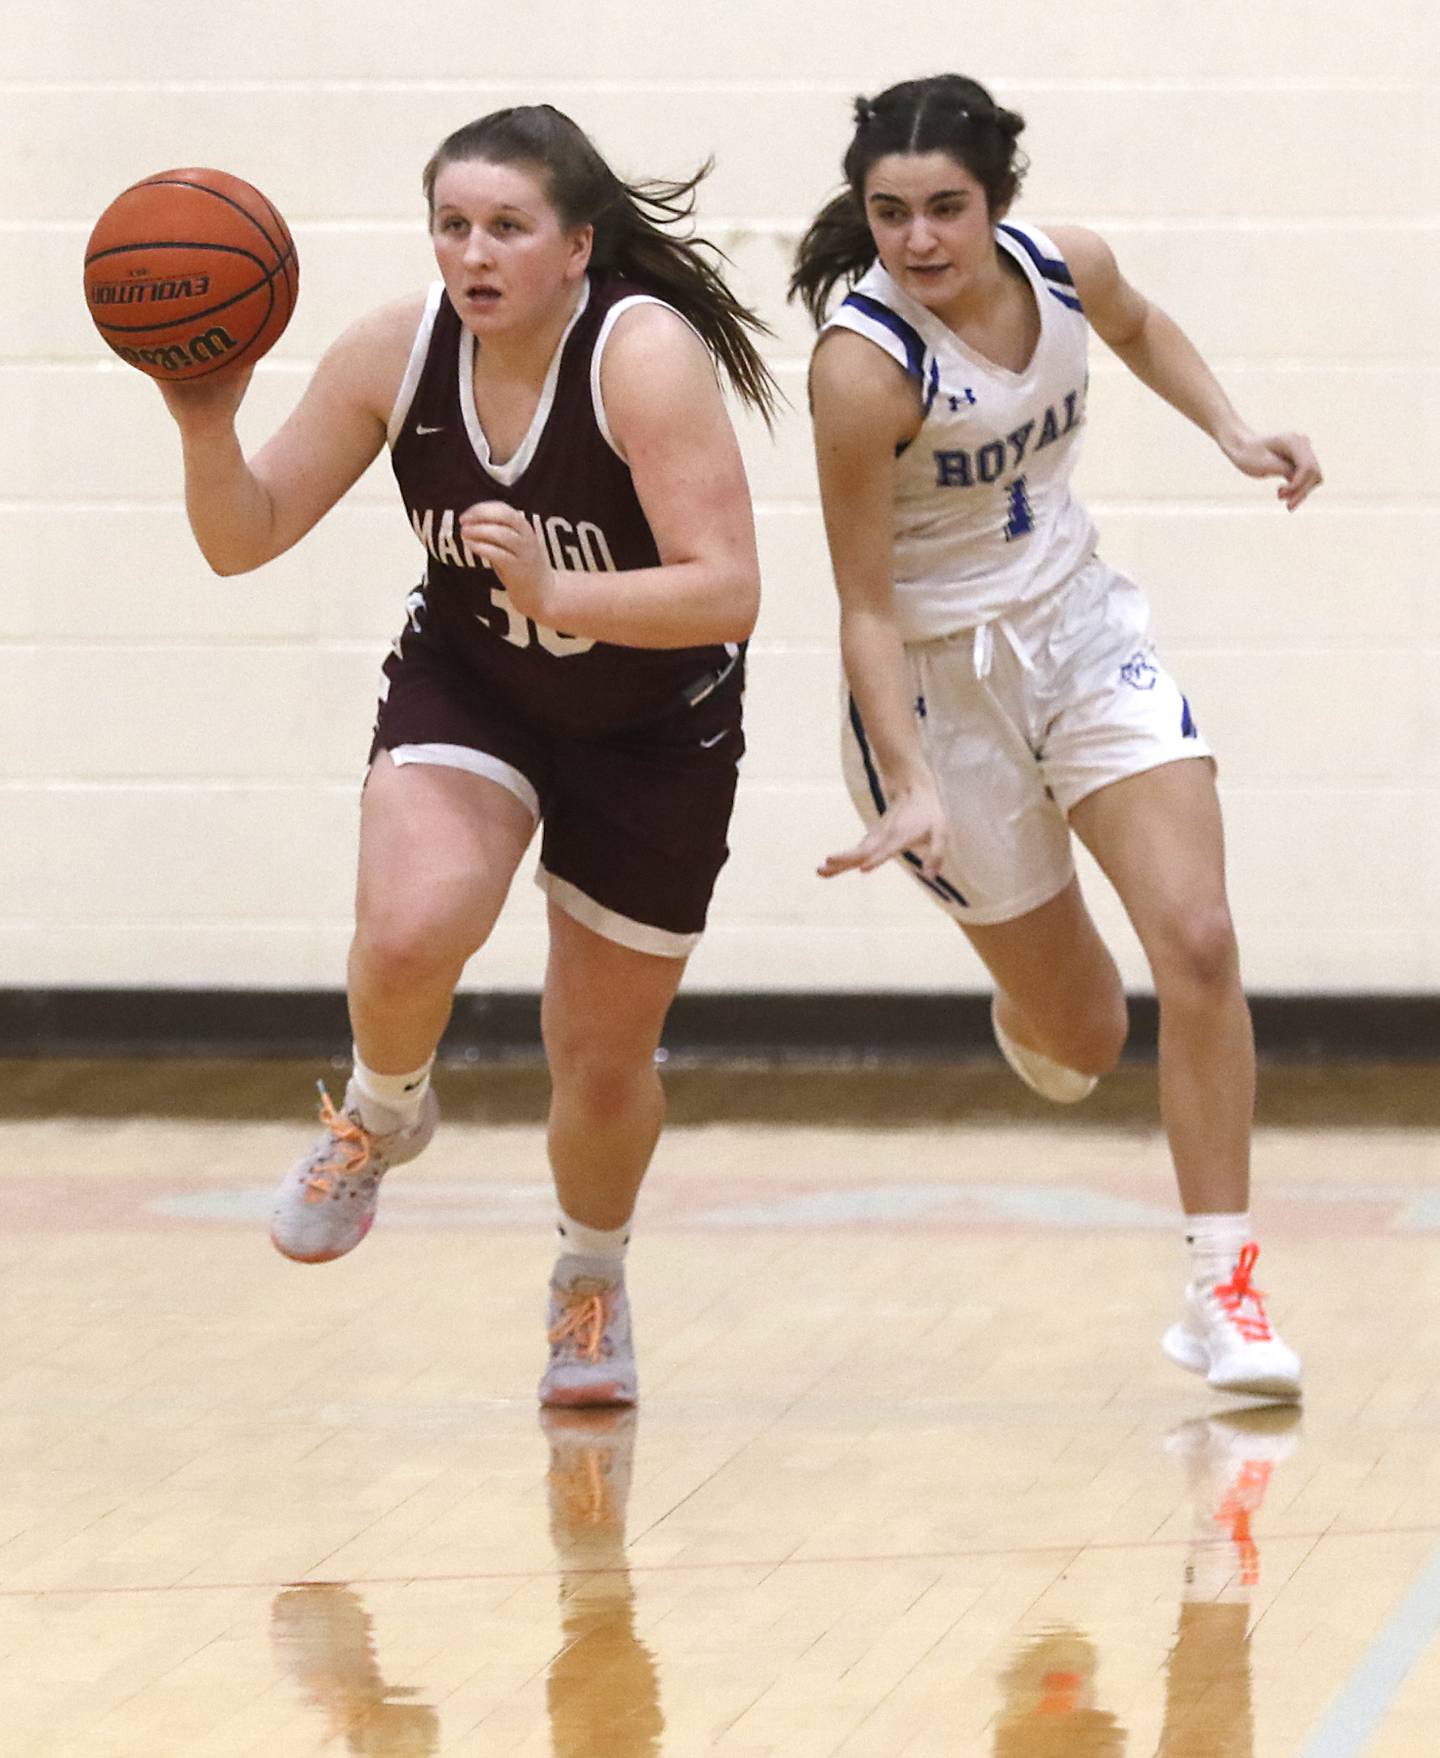 Marengo’s Addie Johnson pushes the ball up the court against Rosary’s Megan Molenhouse during a IHSA Class 2A Regional semifinal basketball game Monday evening, Feb. 14, 2022, between Marengo and Rosary at Marian Central High School.